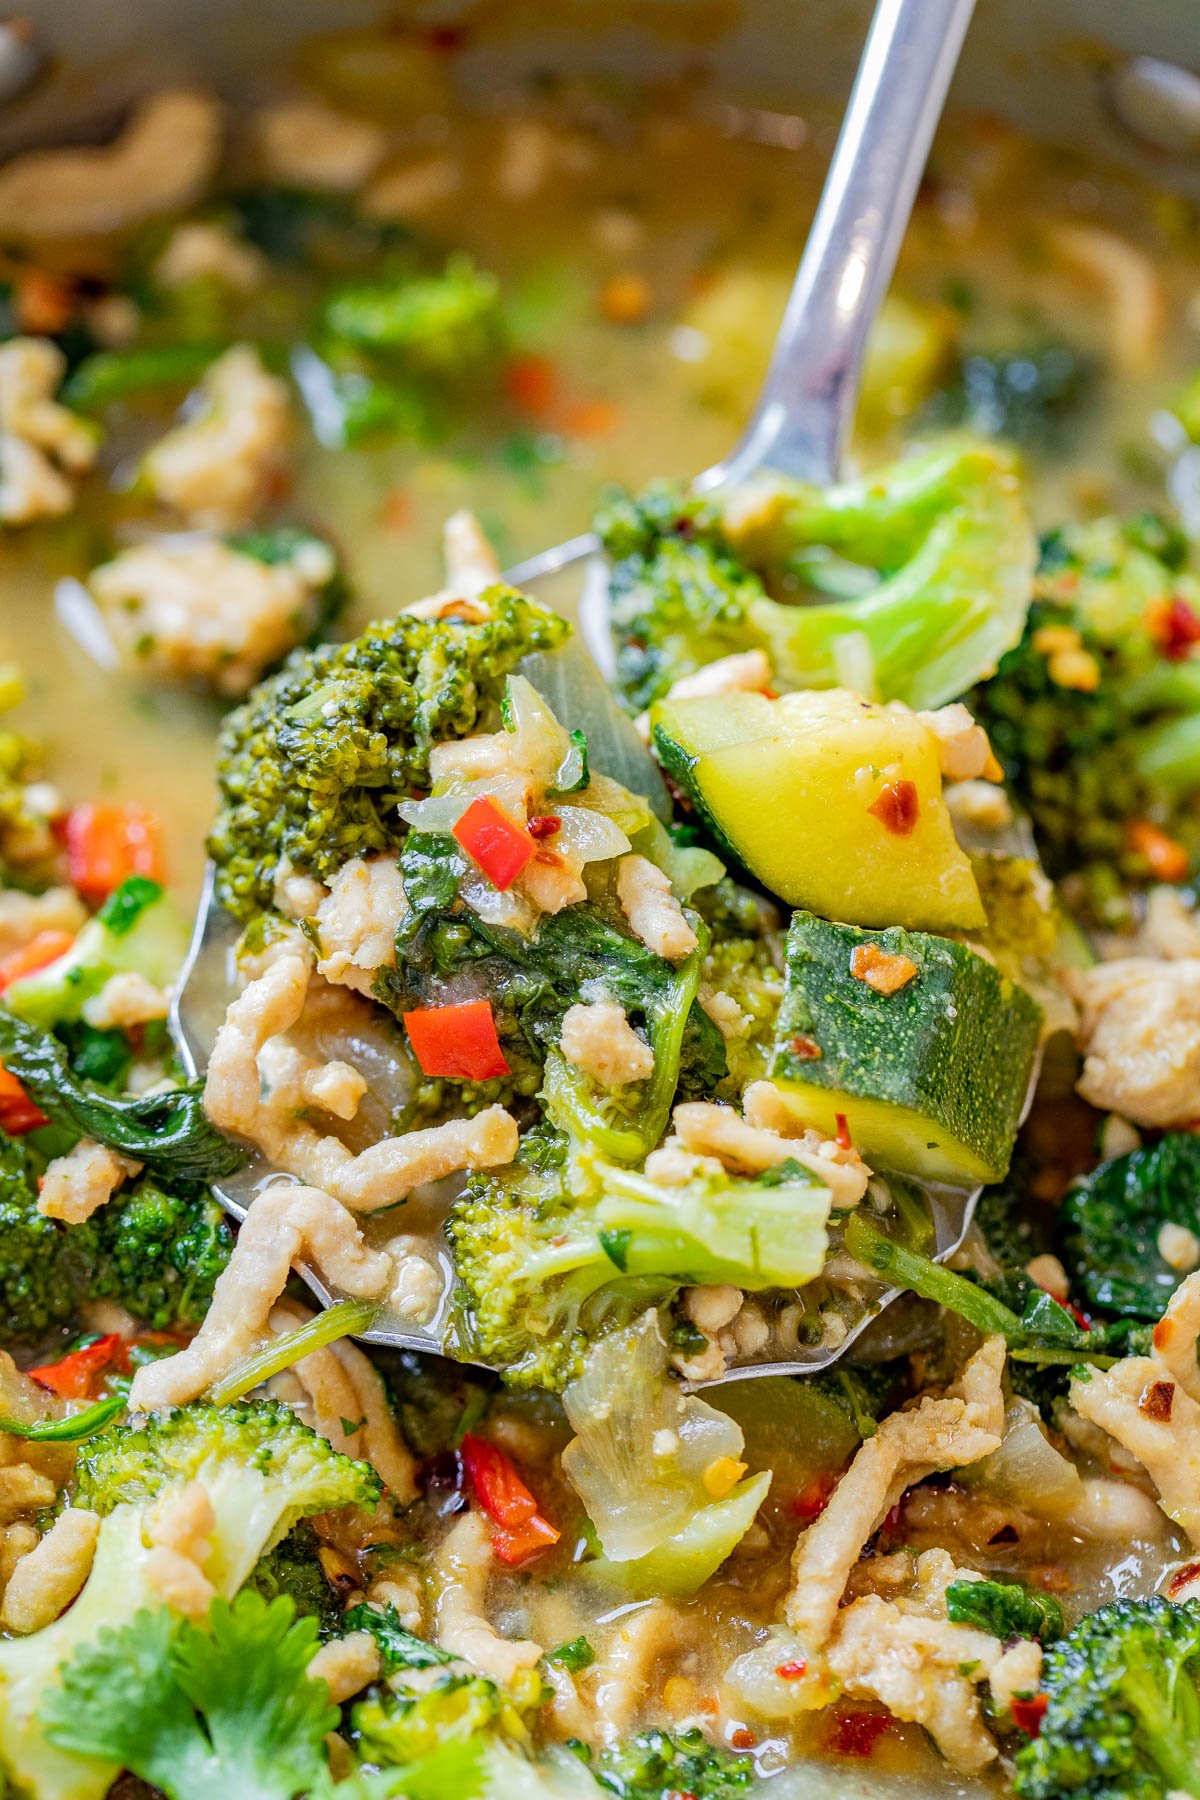 A close-up of a spoon ladling out a colorful curry with leafy greens, and pieces of ground chicken.